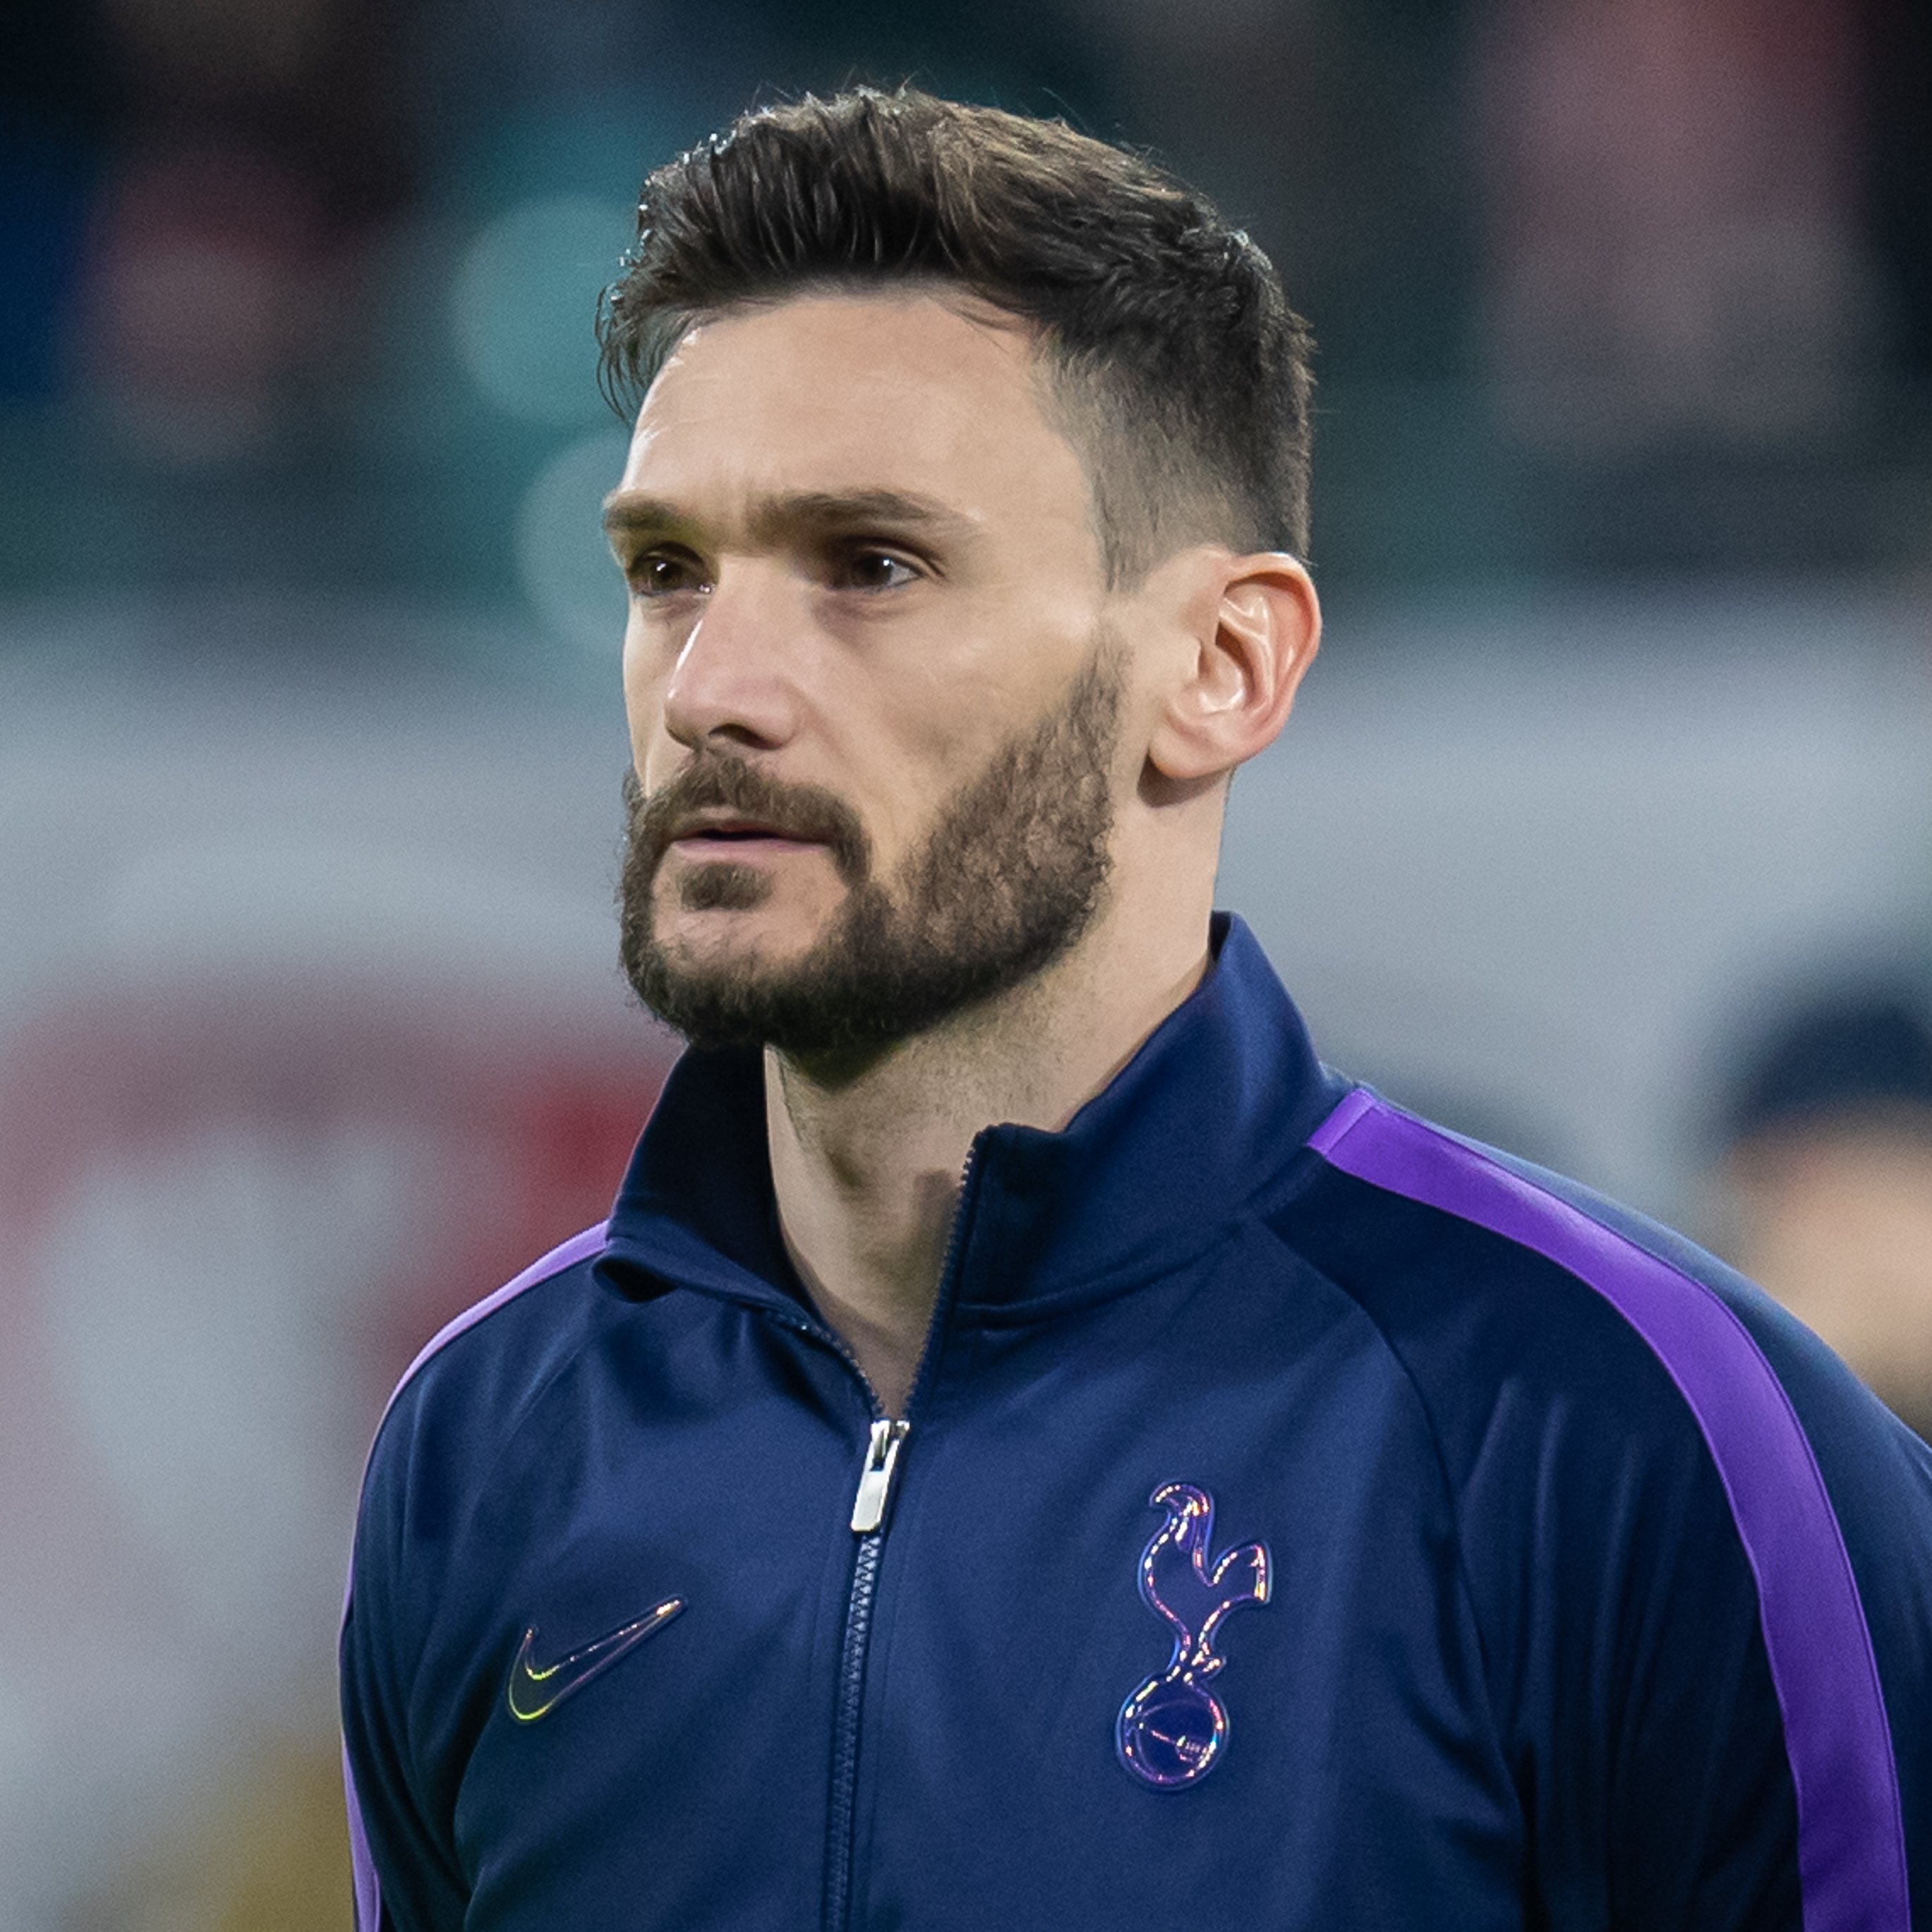 Lloris suggests he will not wear rainbow armband in Qatar